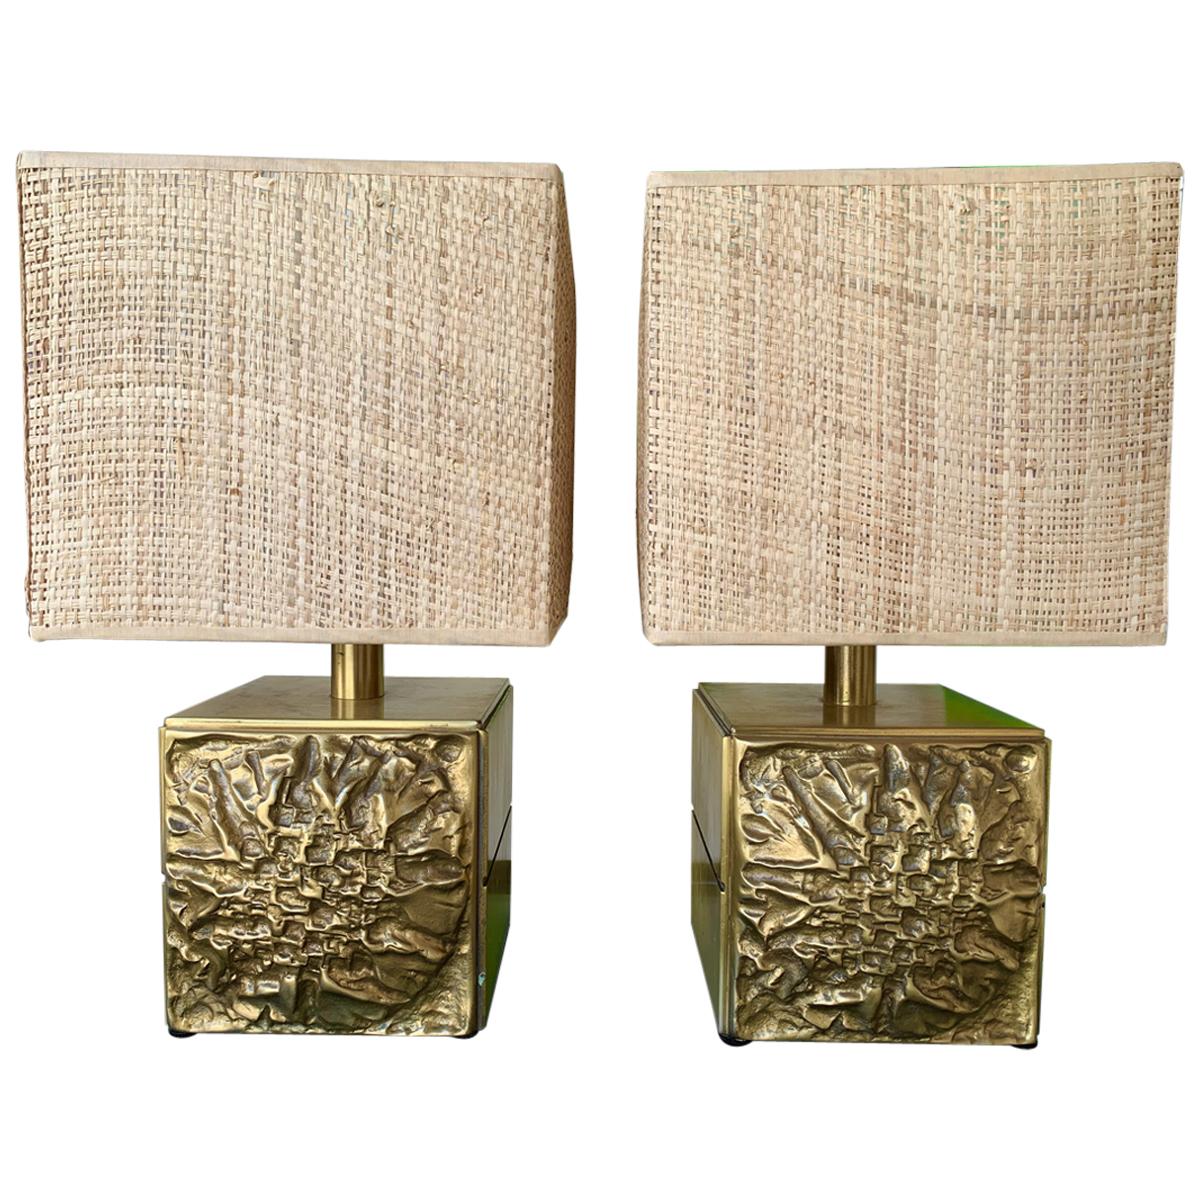 Pair of Brass Lamps by Luciano Frigerio, Italy, 1970s